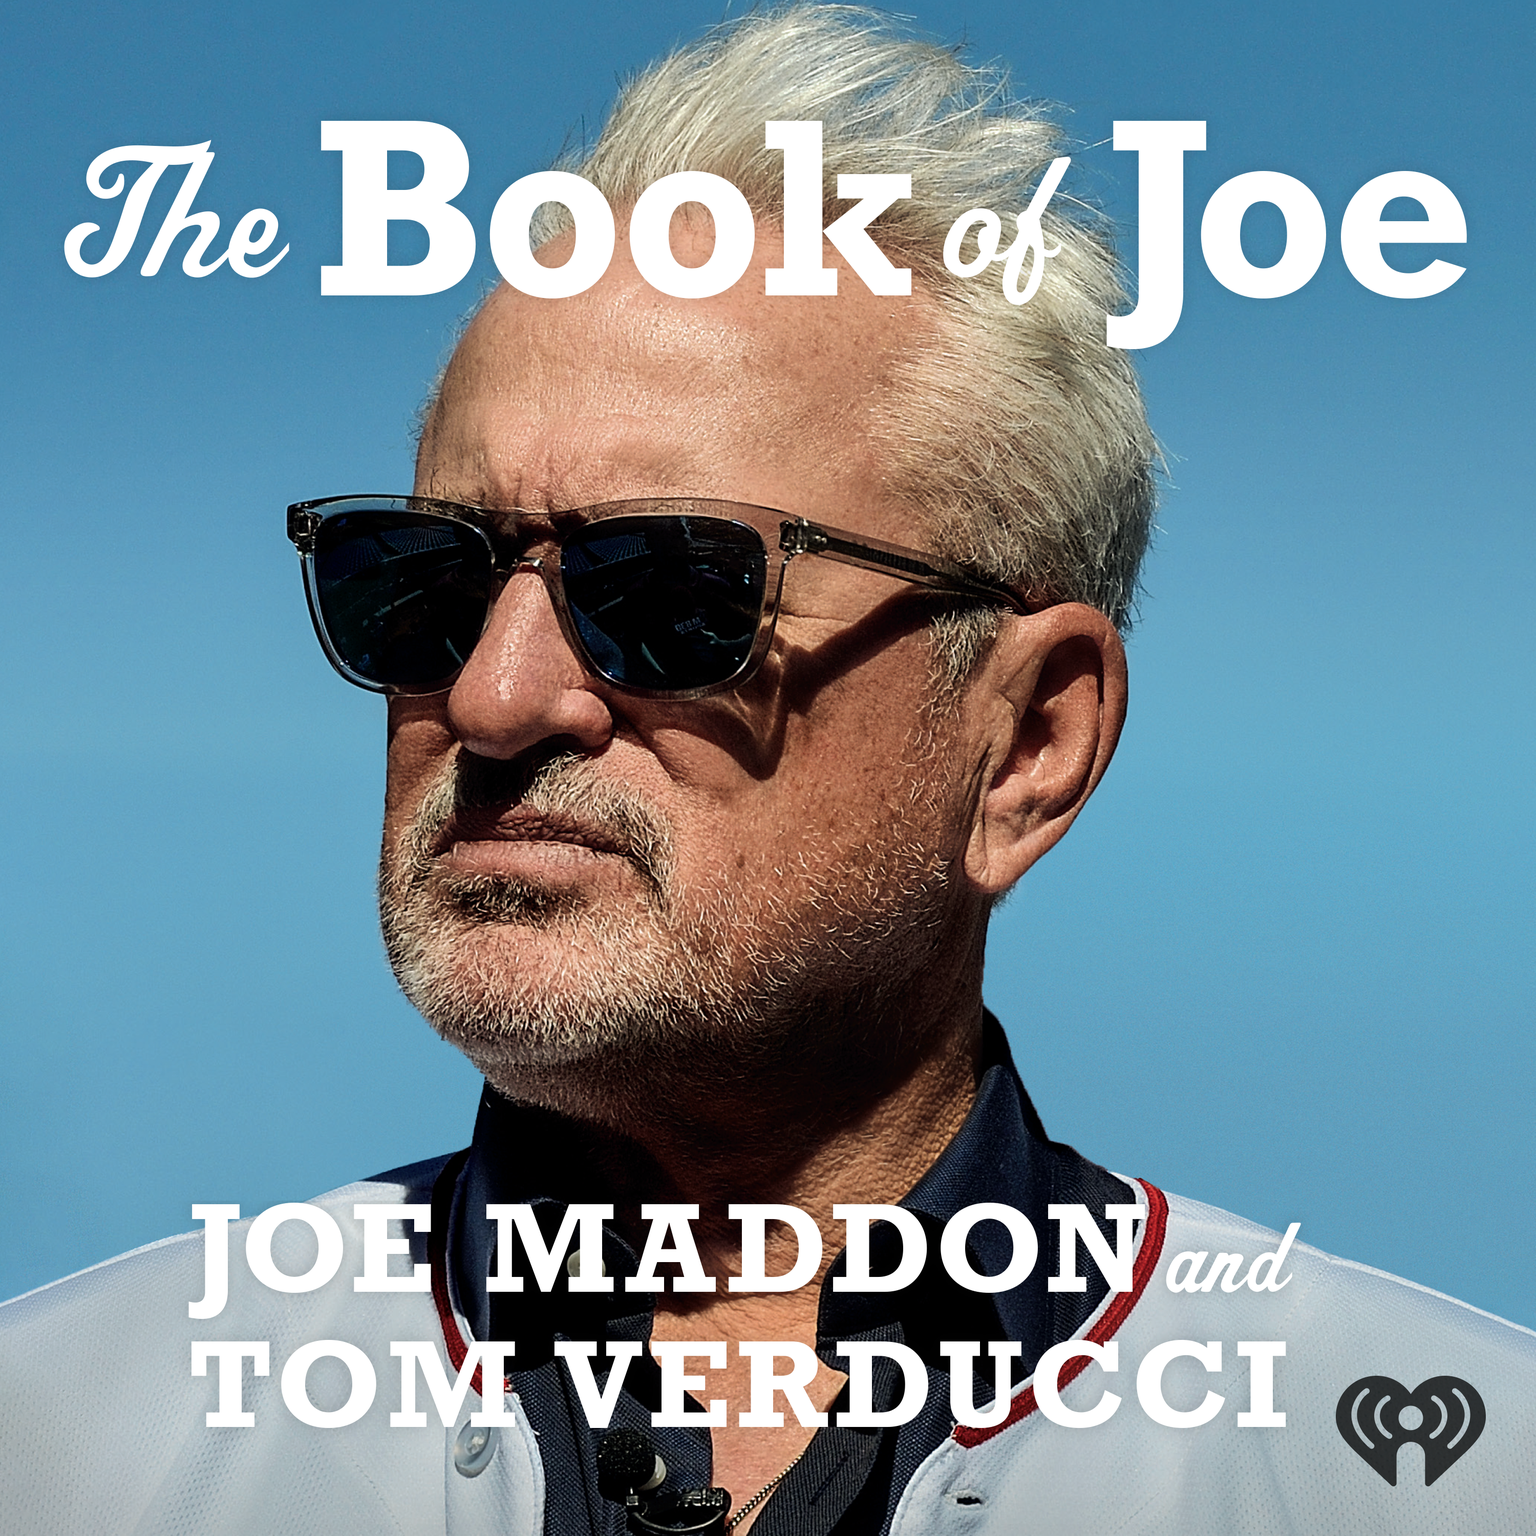 Book of Joe: World Series in Philly, Syndergaard pitching, Valdez questions, and 'Cousin Eddie' RV